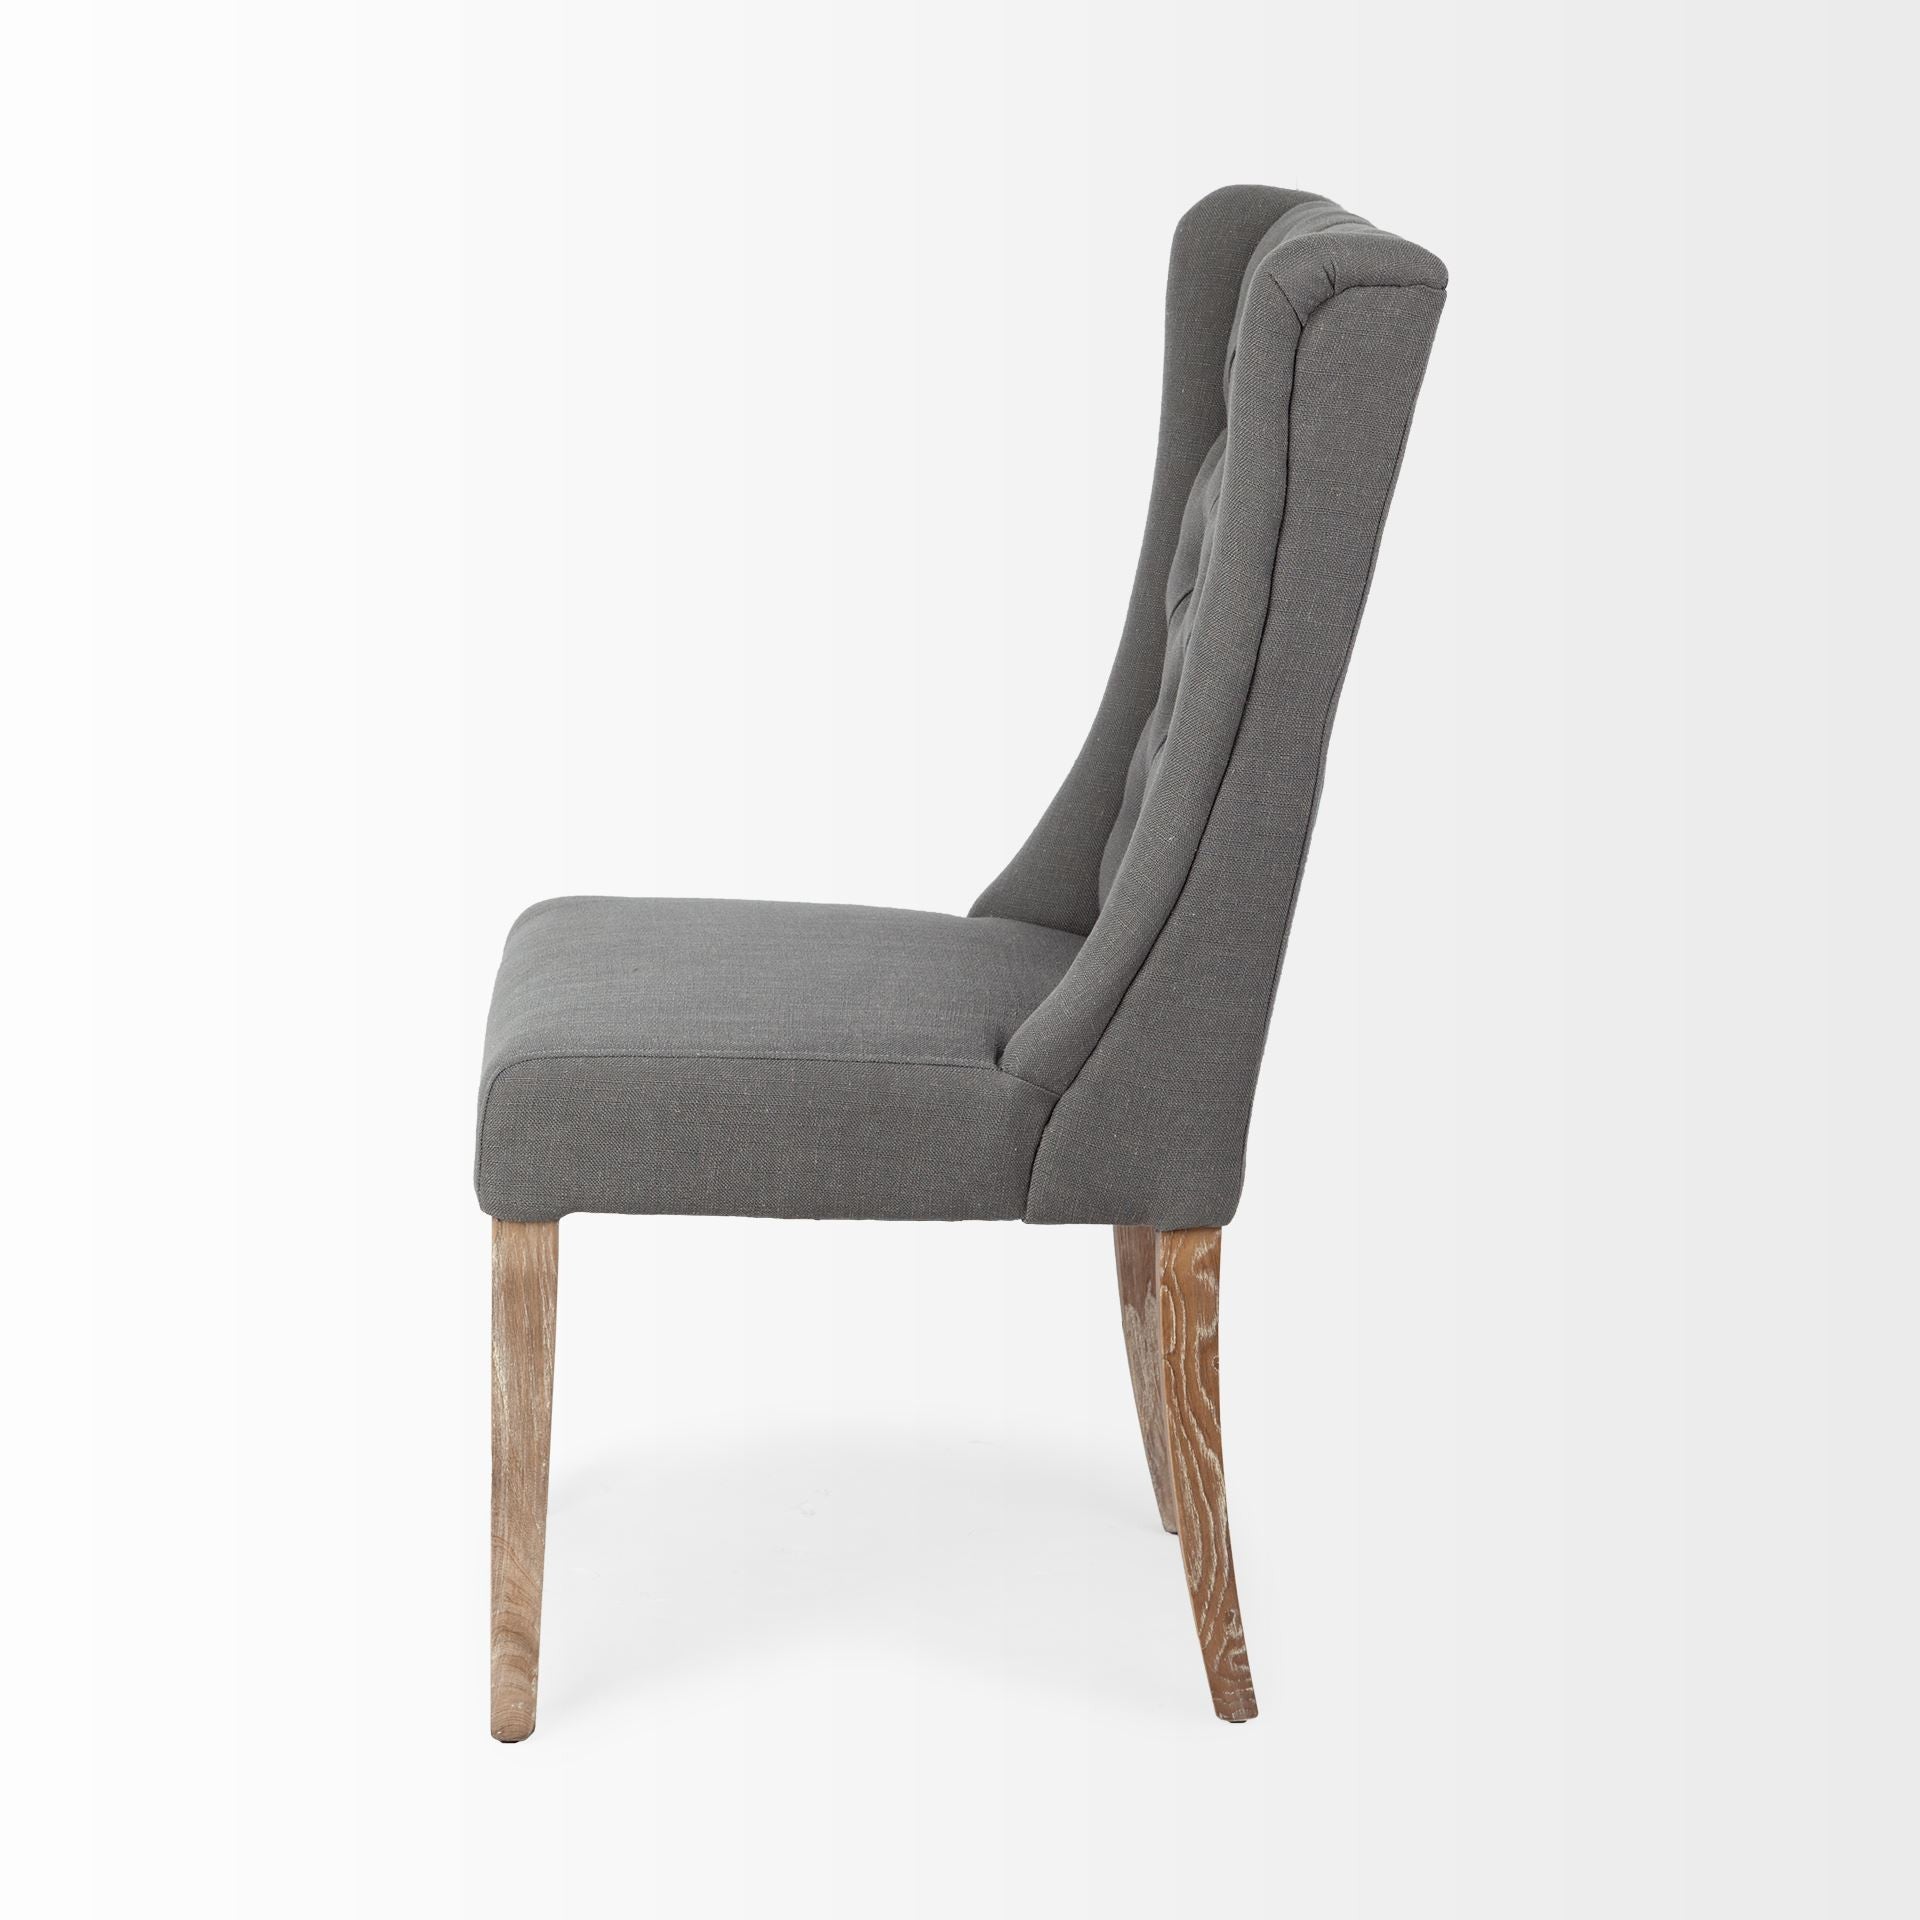 Tufted Gray And Brown Upholstered Linen Wing Back Dining Side Chair